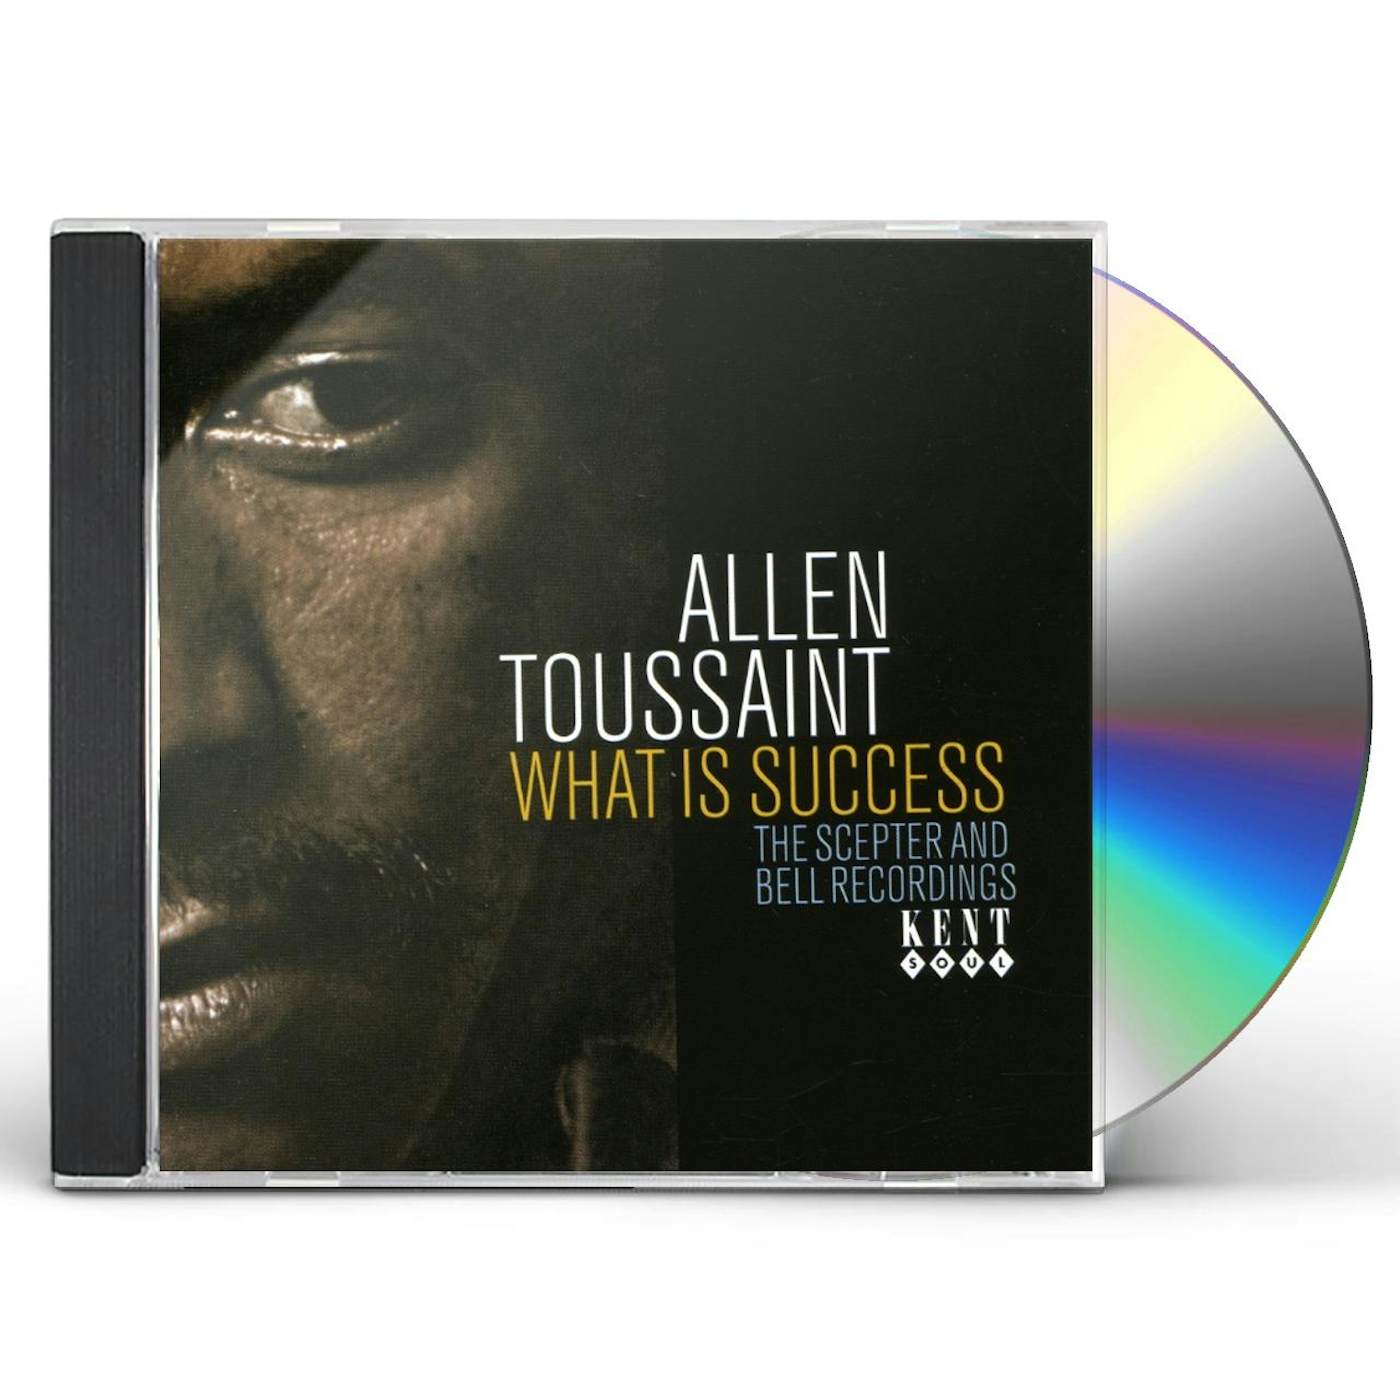 Allen Toussaint WHAT IS SUCCESS: THE SCEPTER & BELL RECORDINGS CD